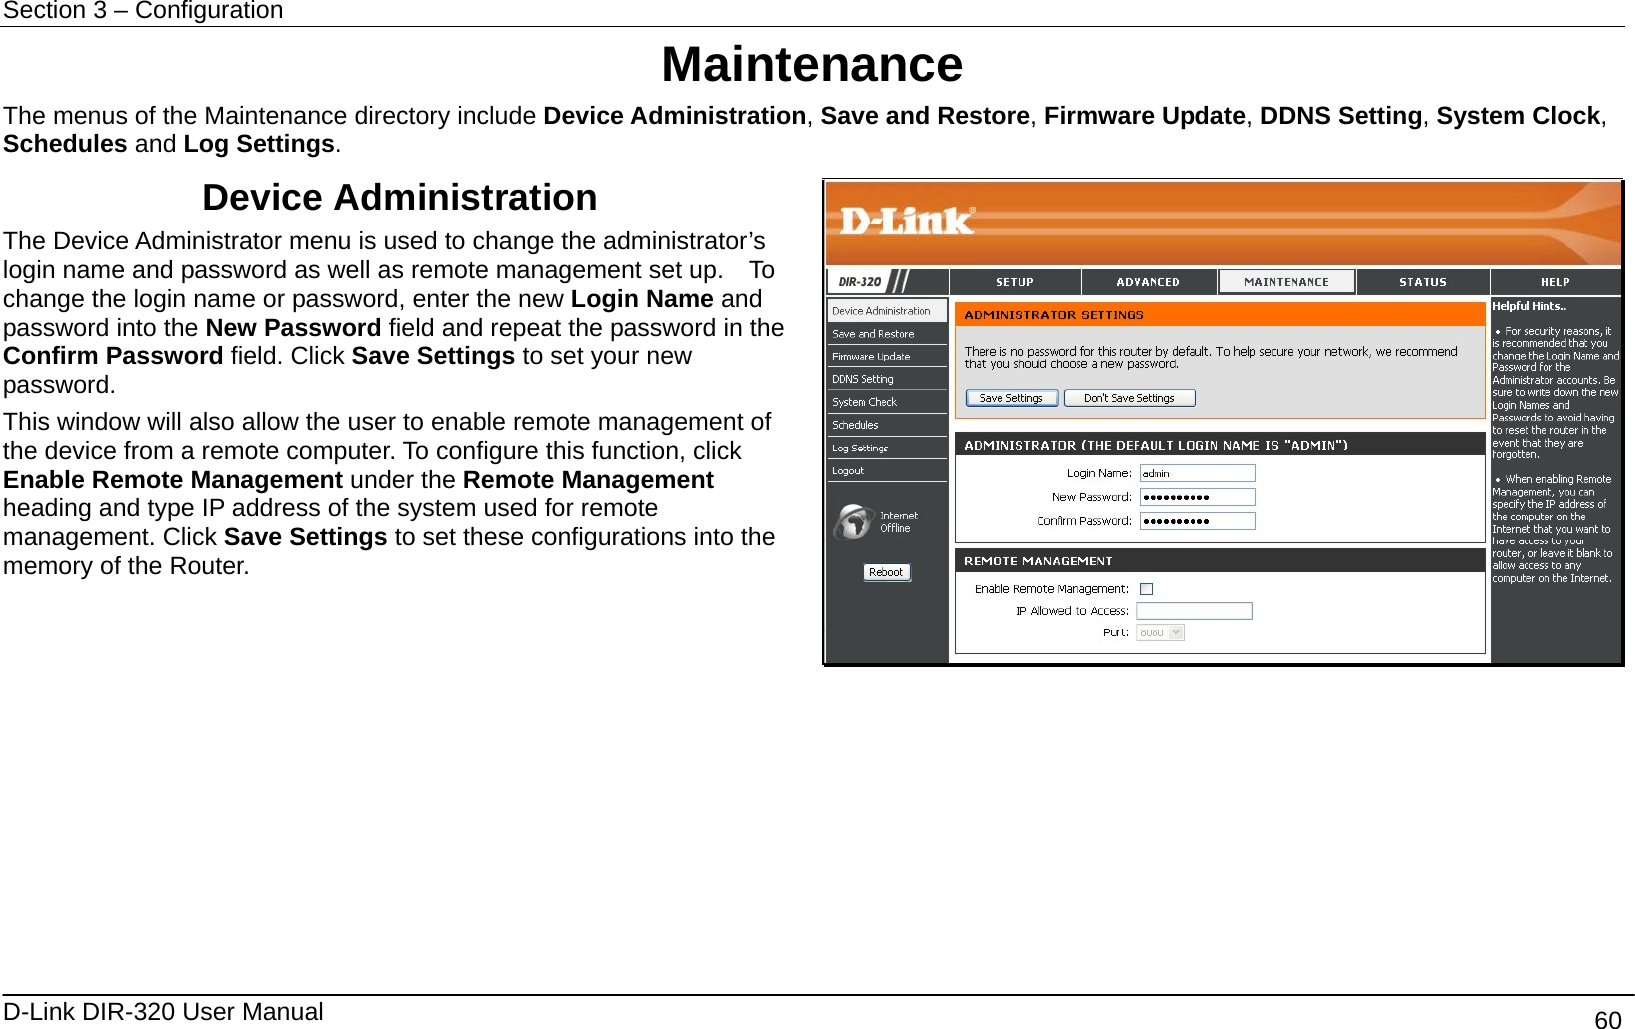 Section 3 – Configuration   D-Link DIR-320 User Manual                                       60 Maintenance The menus of the Maintenance directory include Device Administration, Save and Restore, Firmware Update, DDNS Setting, System Clock, Schedules and Log Settings. Device Administration The Device Administrator menu is used to change the administrator’s login name and password as well as remote management set up.    To change the login name or password, enter the new Login Name and password into the New Password field and repeat the password in the Confirm Password field. Click Save Settings to set your new password. This window will also allow the user to enable remote management of the device from a remote computer. To configure this function, click Enable Remote Management under the Remote Management heading and type IP address of the system used for remote management. Click Save Settings to set these configurations into the memory of the Router.         